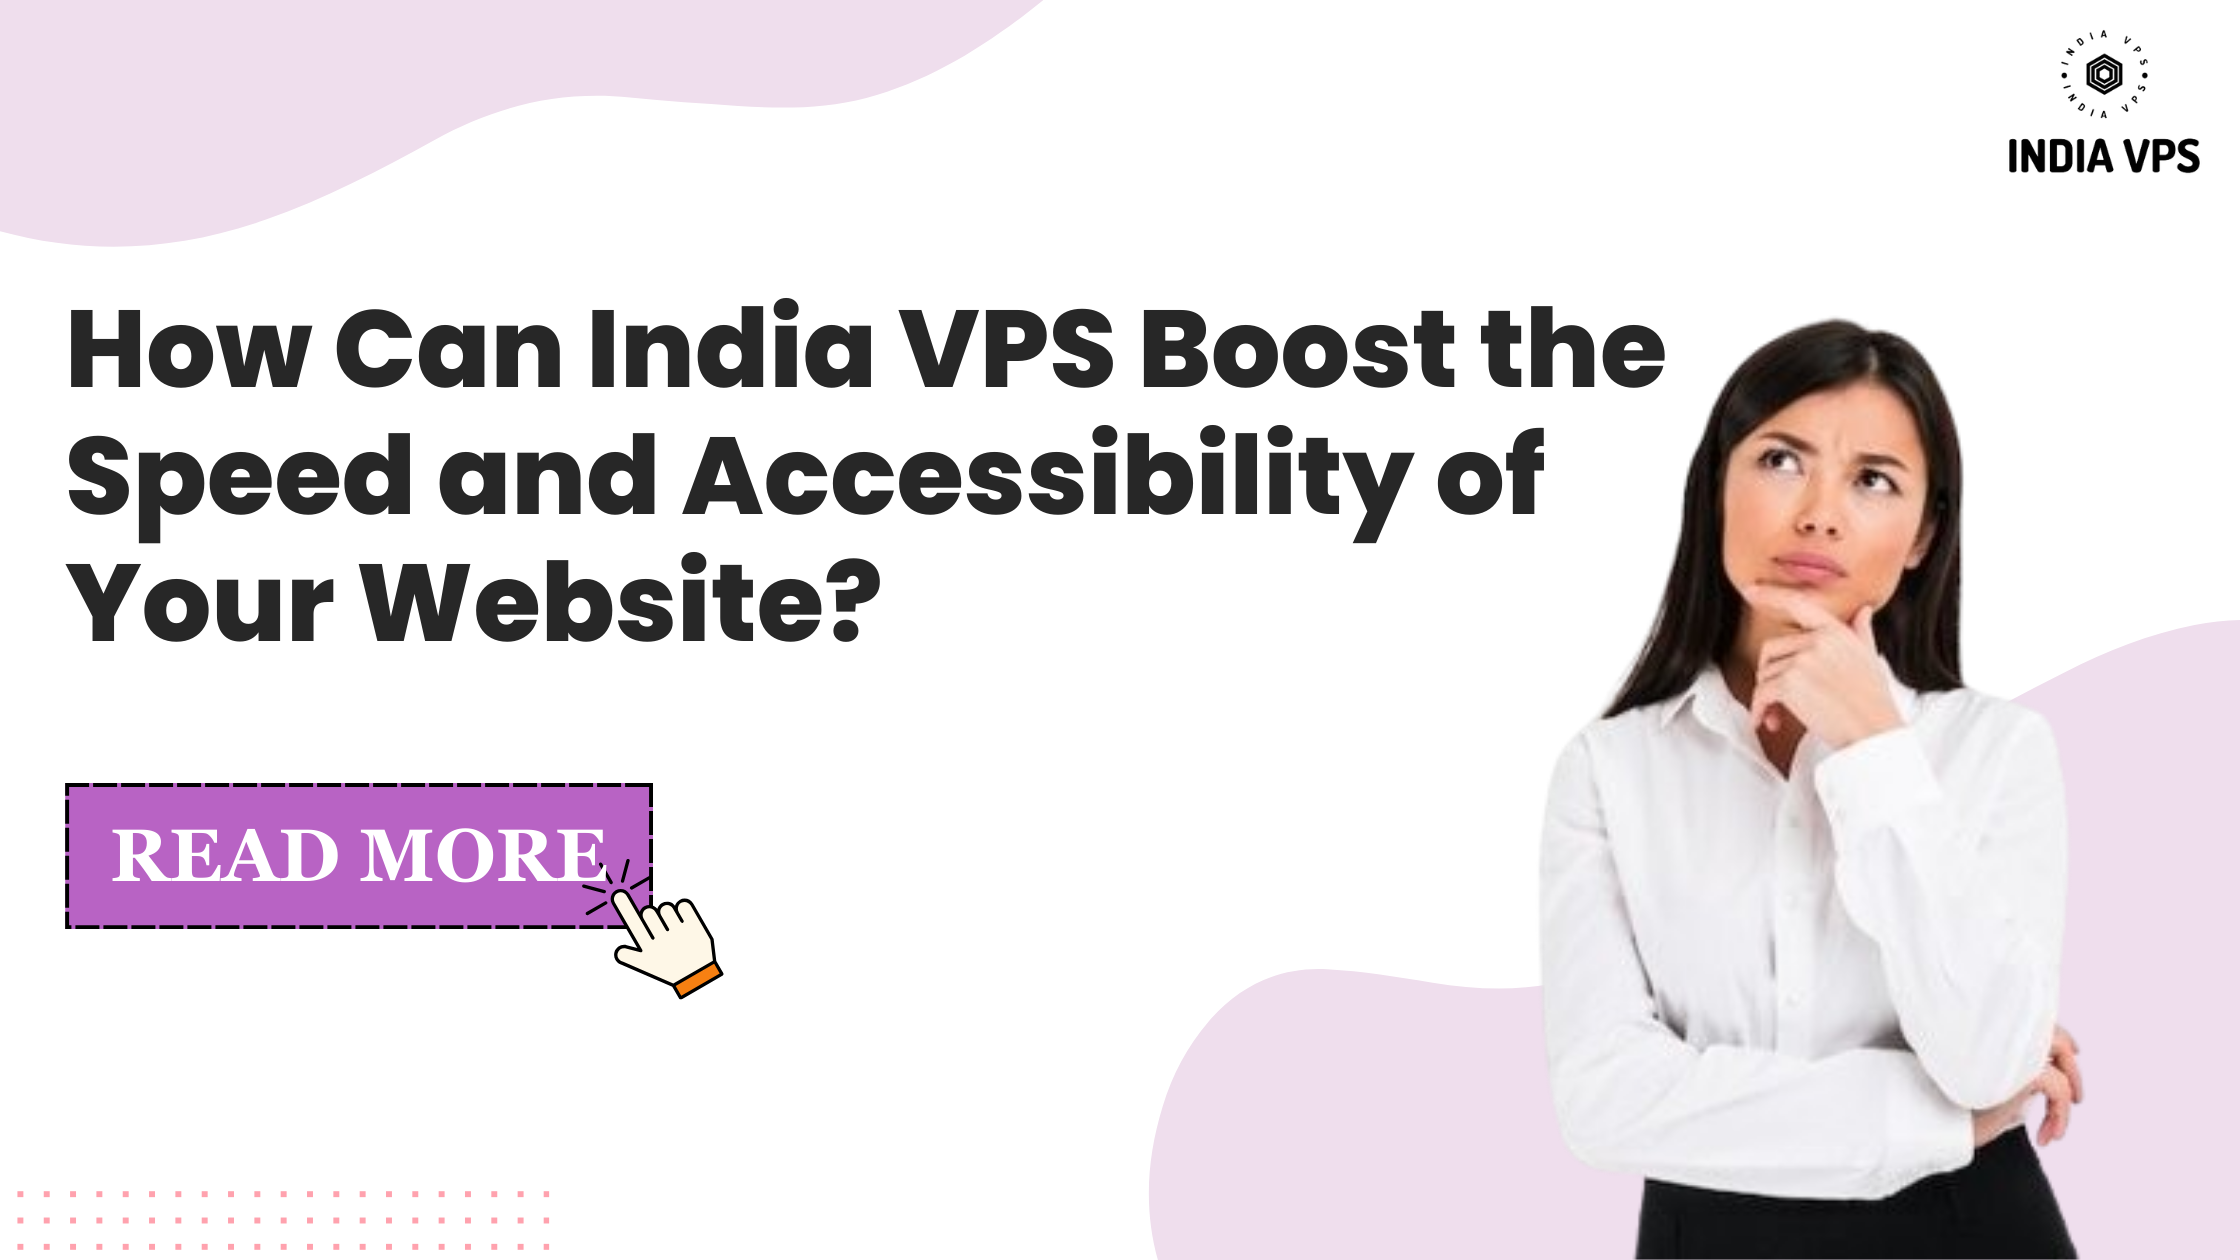 How Can India VPS Boost the Speed and Accessibility of Your Website